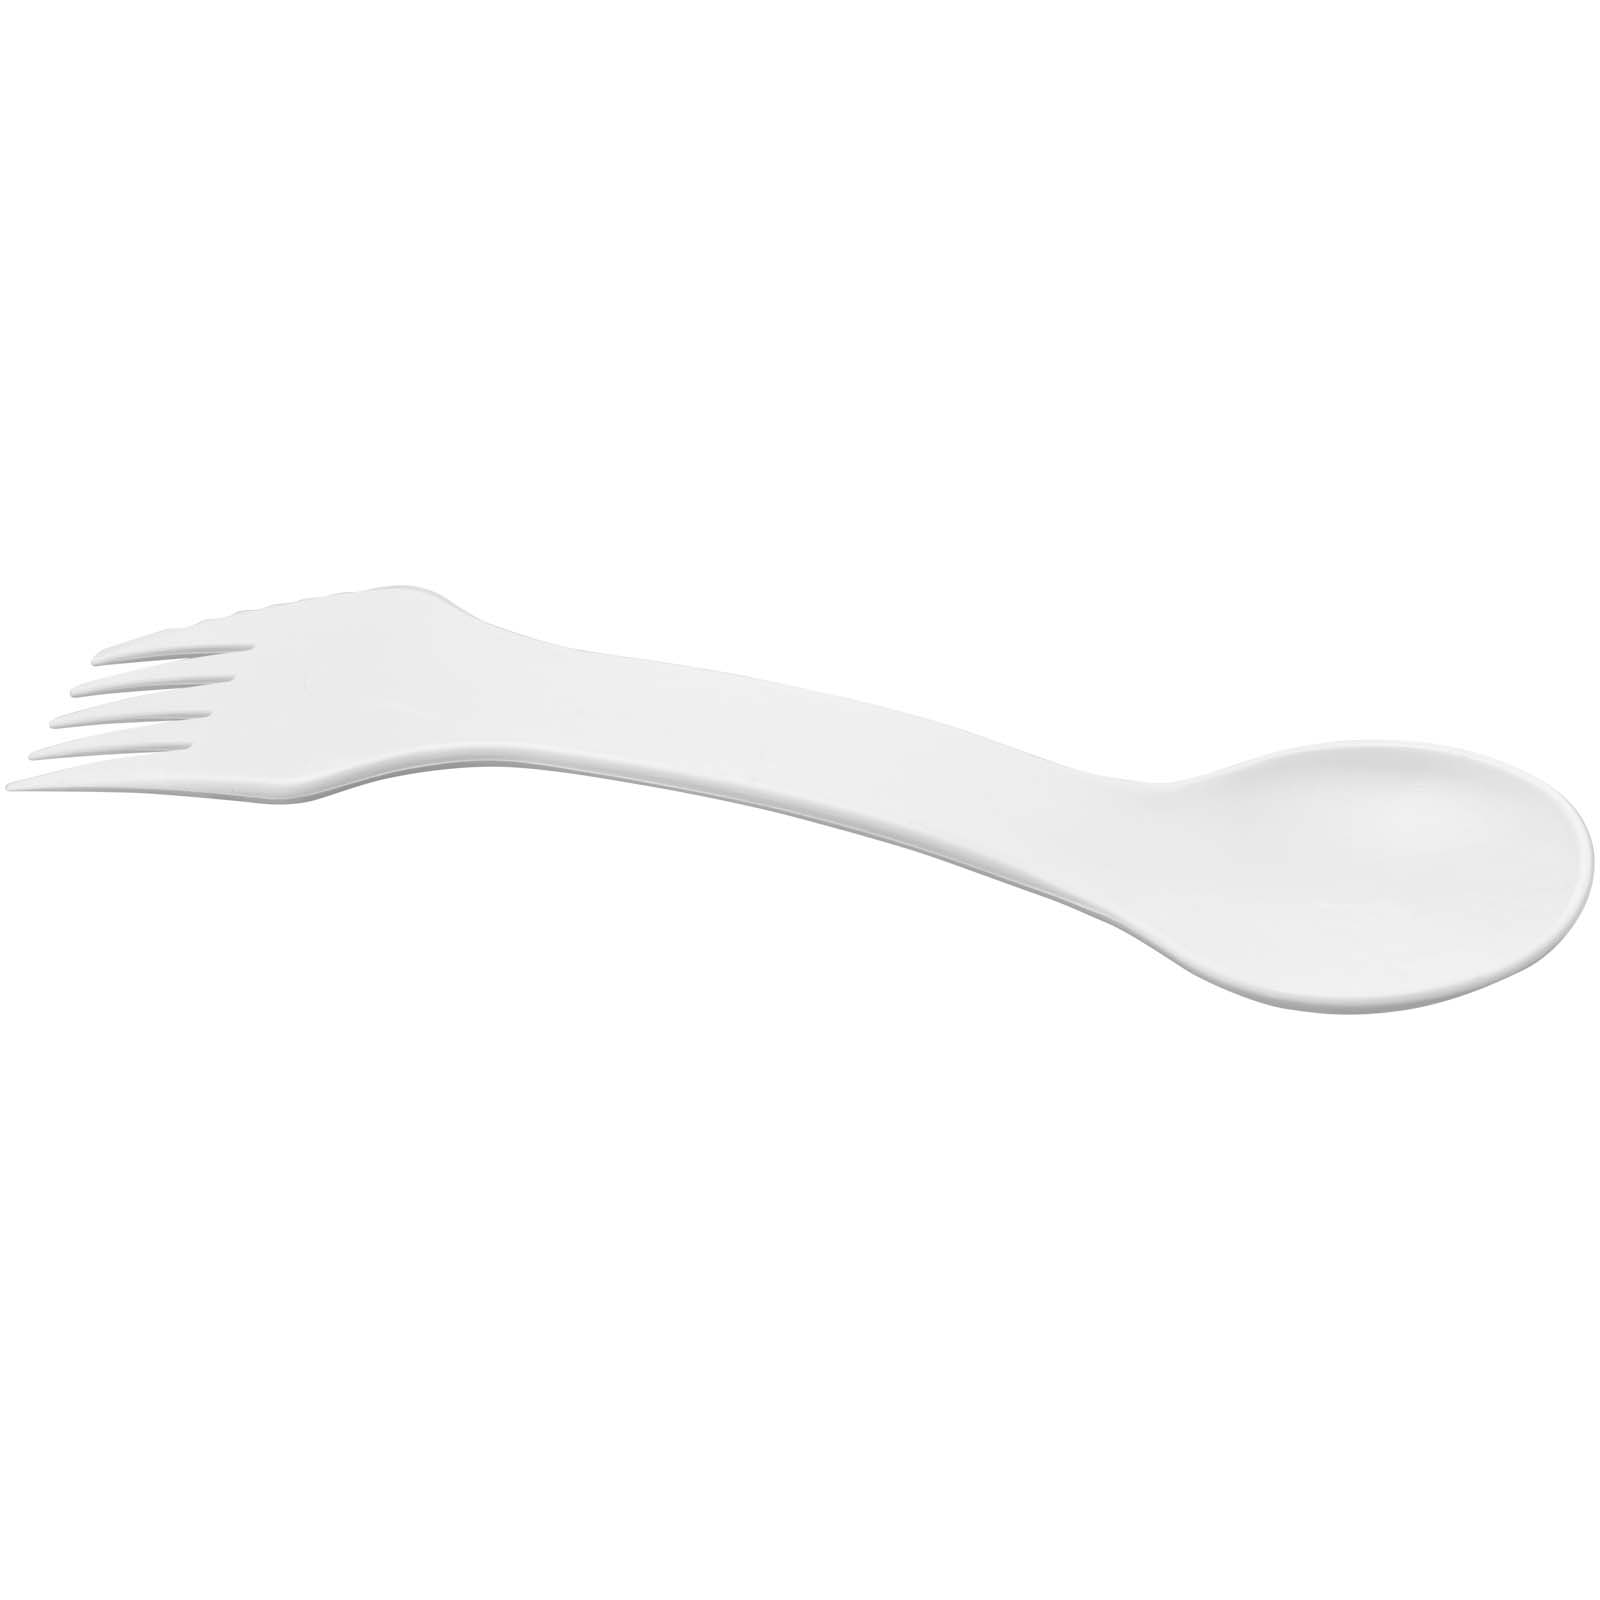 Advertising Home Accessories - Epsy Rise spork - 3